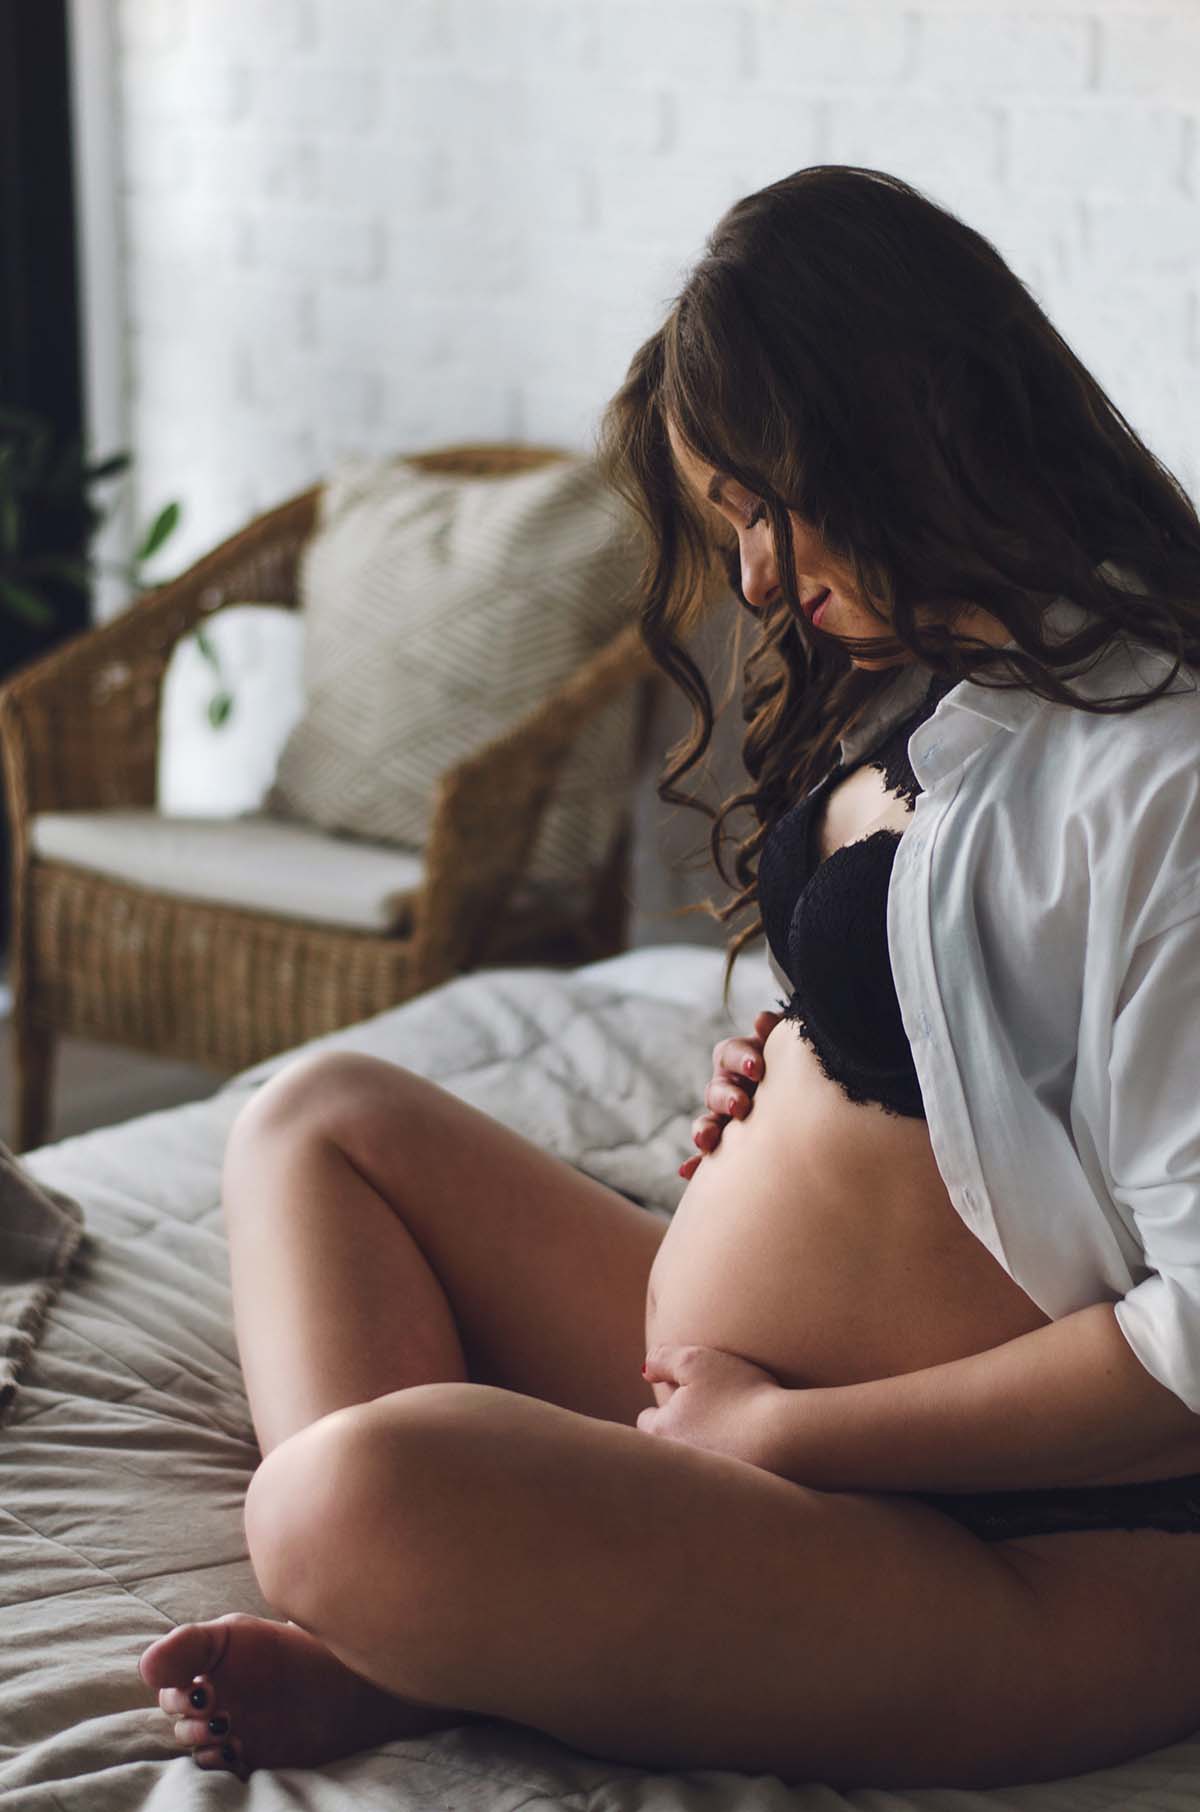 Are you one of those women that secretly hate being pregnant? It's okay, you're not alone, even though it feels like it. Pregnancy just sucks for some women, it's not all happy days and pregnancy glow. And that's okay.